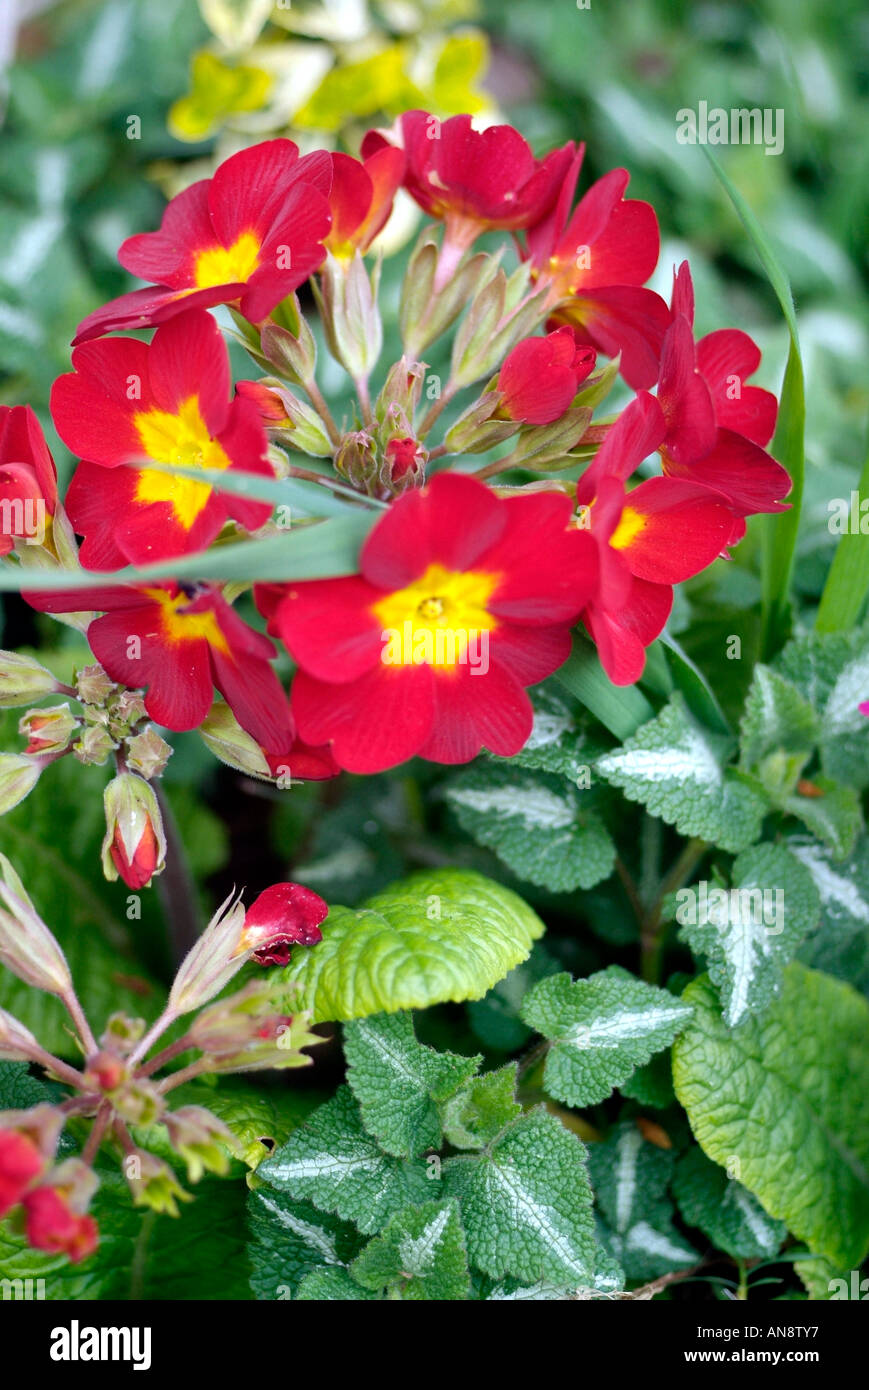 portrait format picture of red flowers Stock Photo